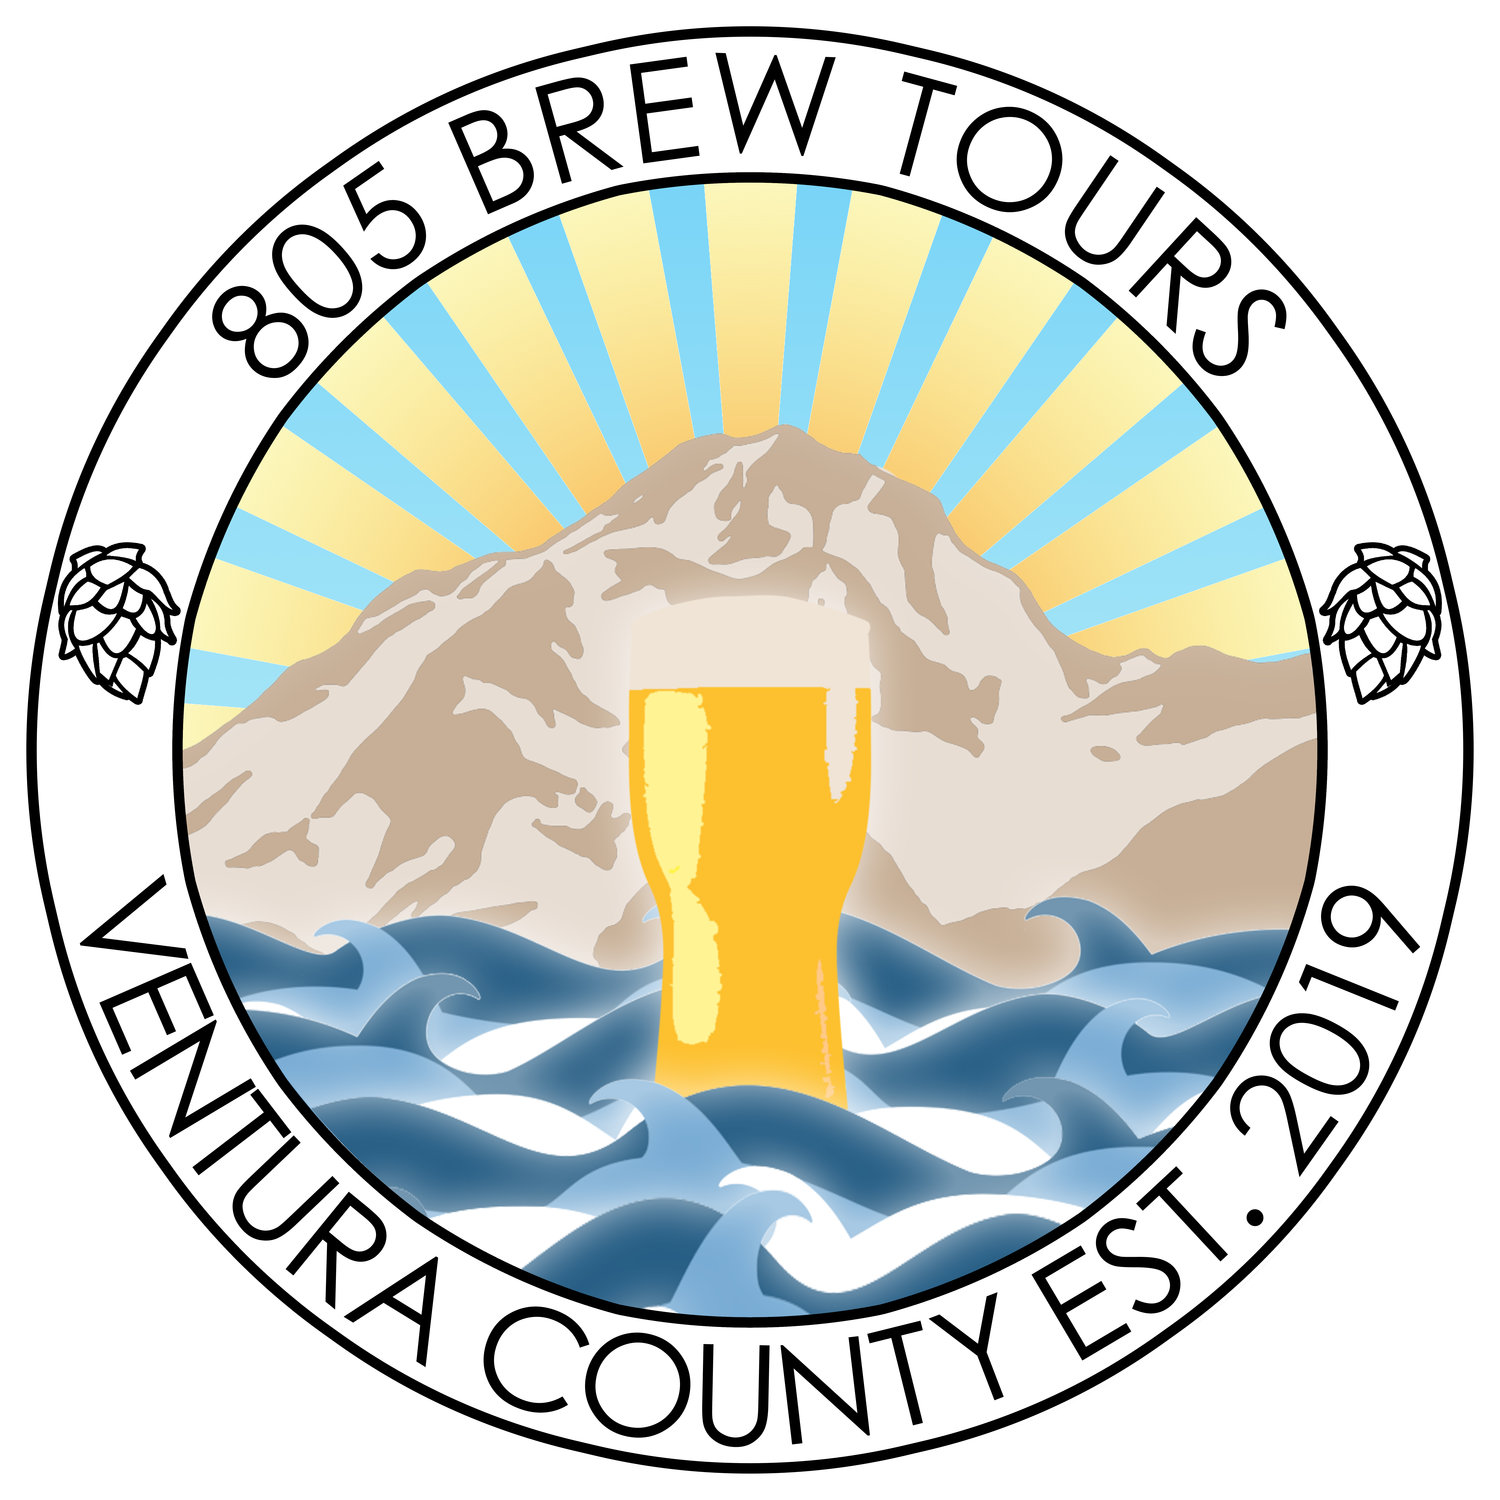 805 brewery tours